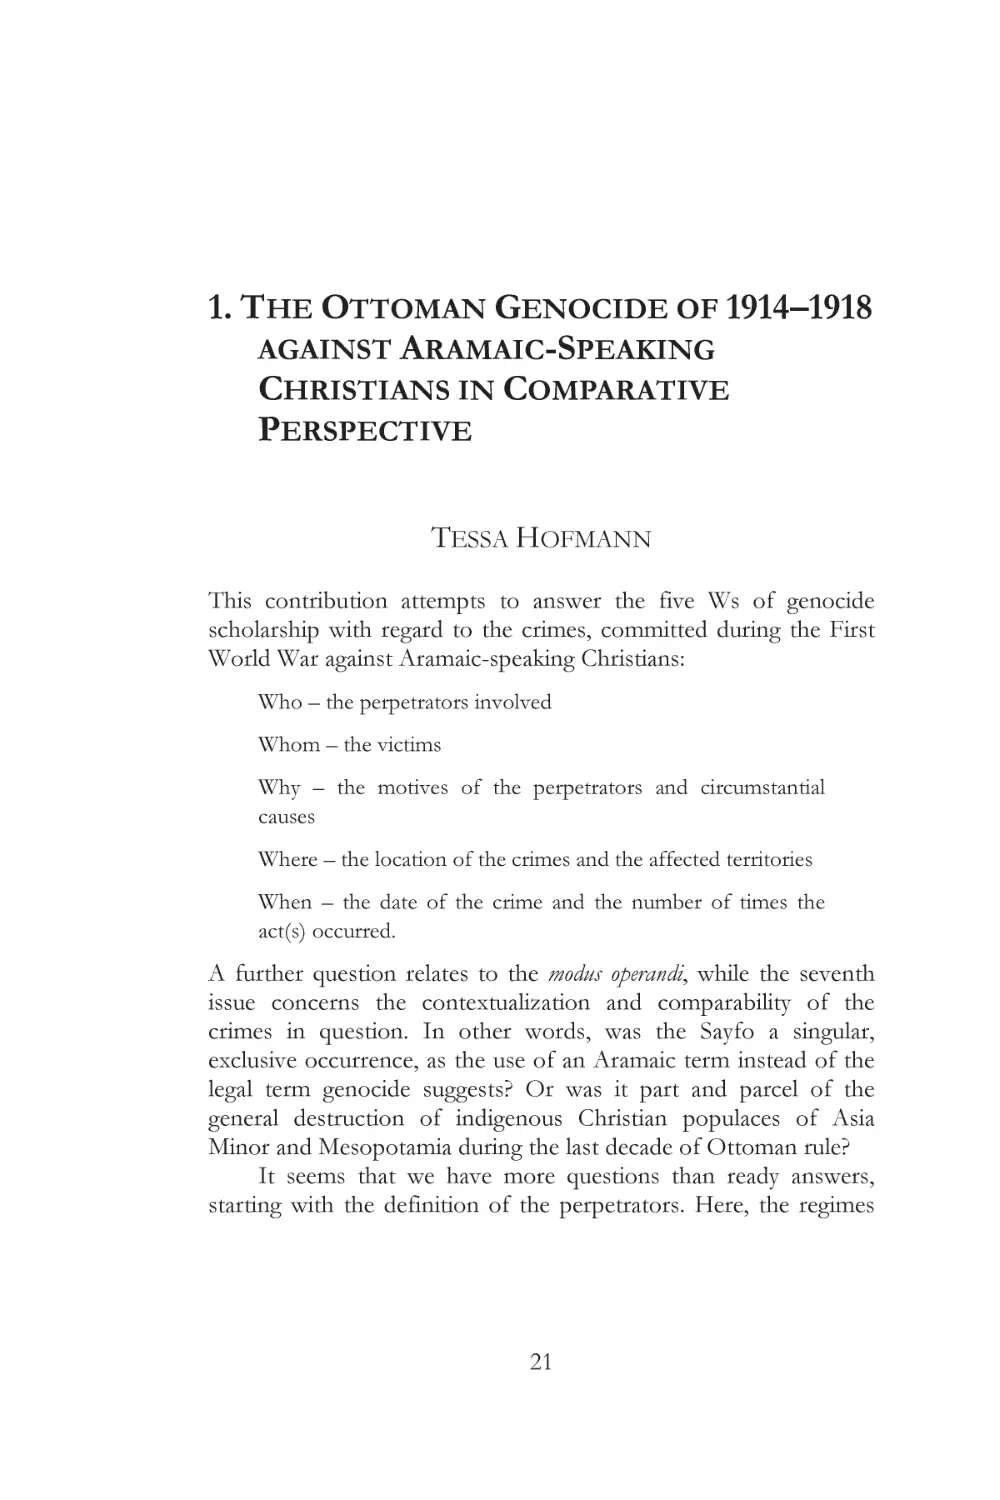 I. THE SAYFO AND ARCHIVES
1. THE OTTOMAN GENOCIDE OF 1914–1918 AGAINST ARAMAIC-SPEAKING CHRISTIANS IN COMPARATIVE PERSPECTIVE